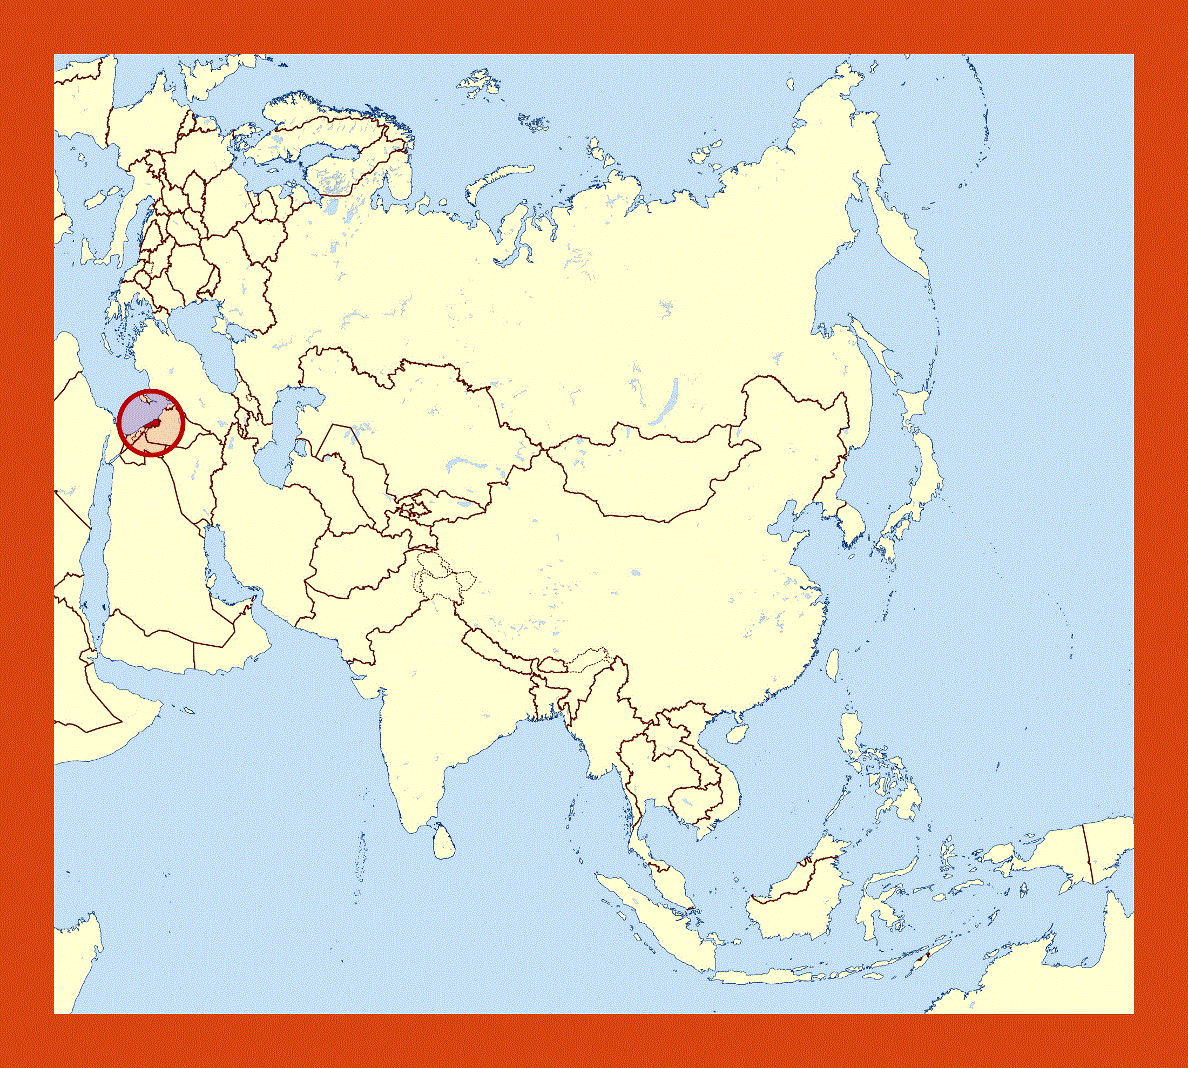 Location map of Lebanon in Asia